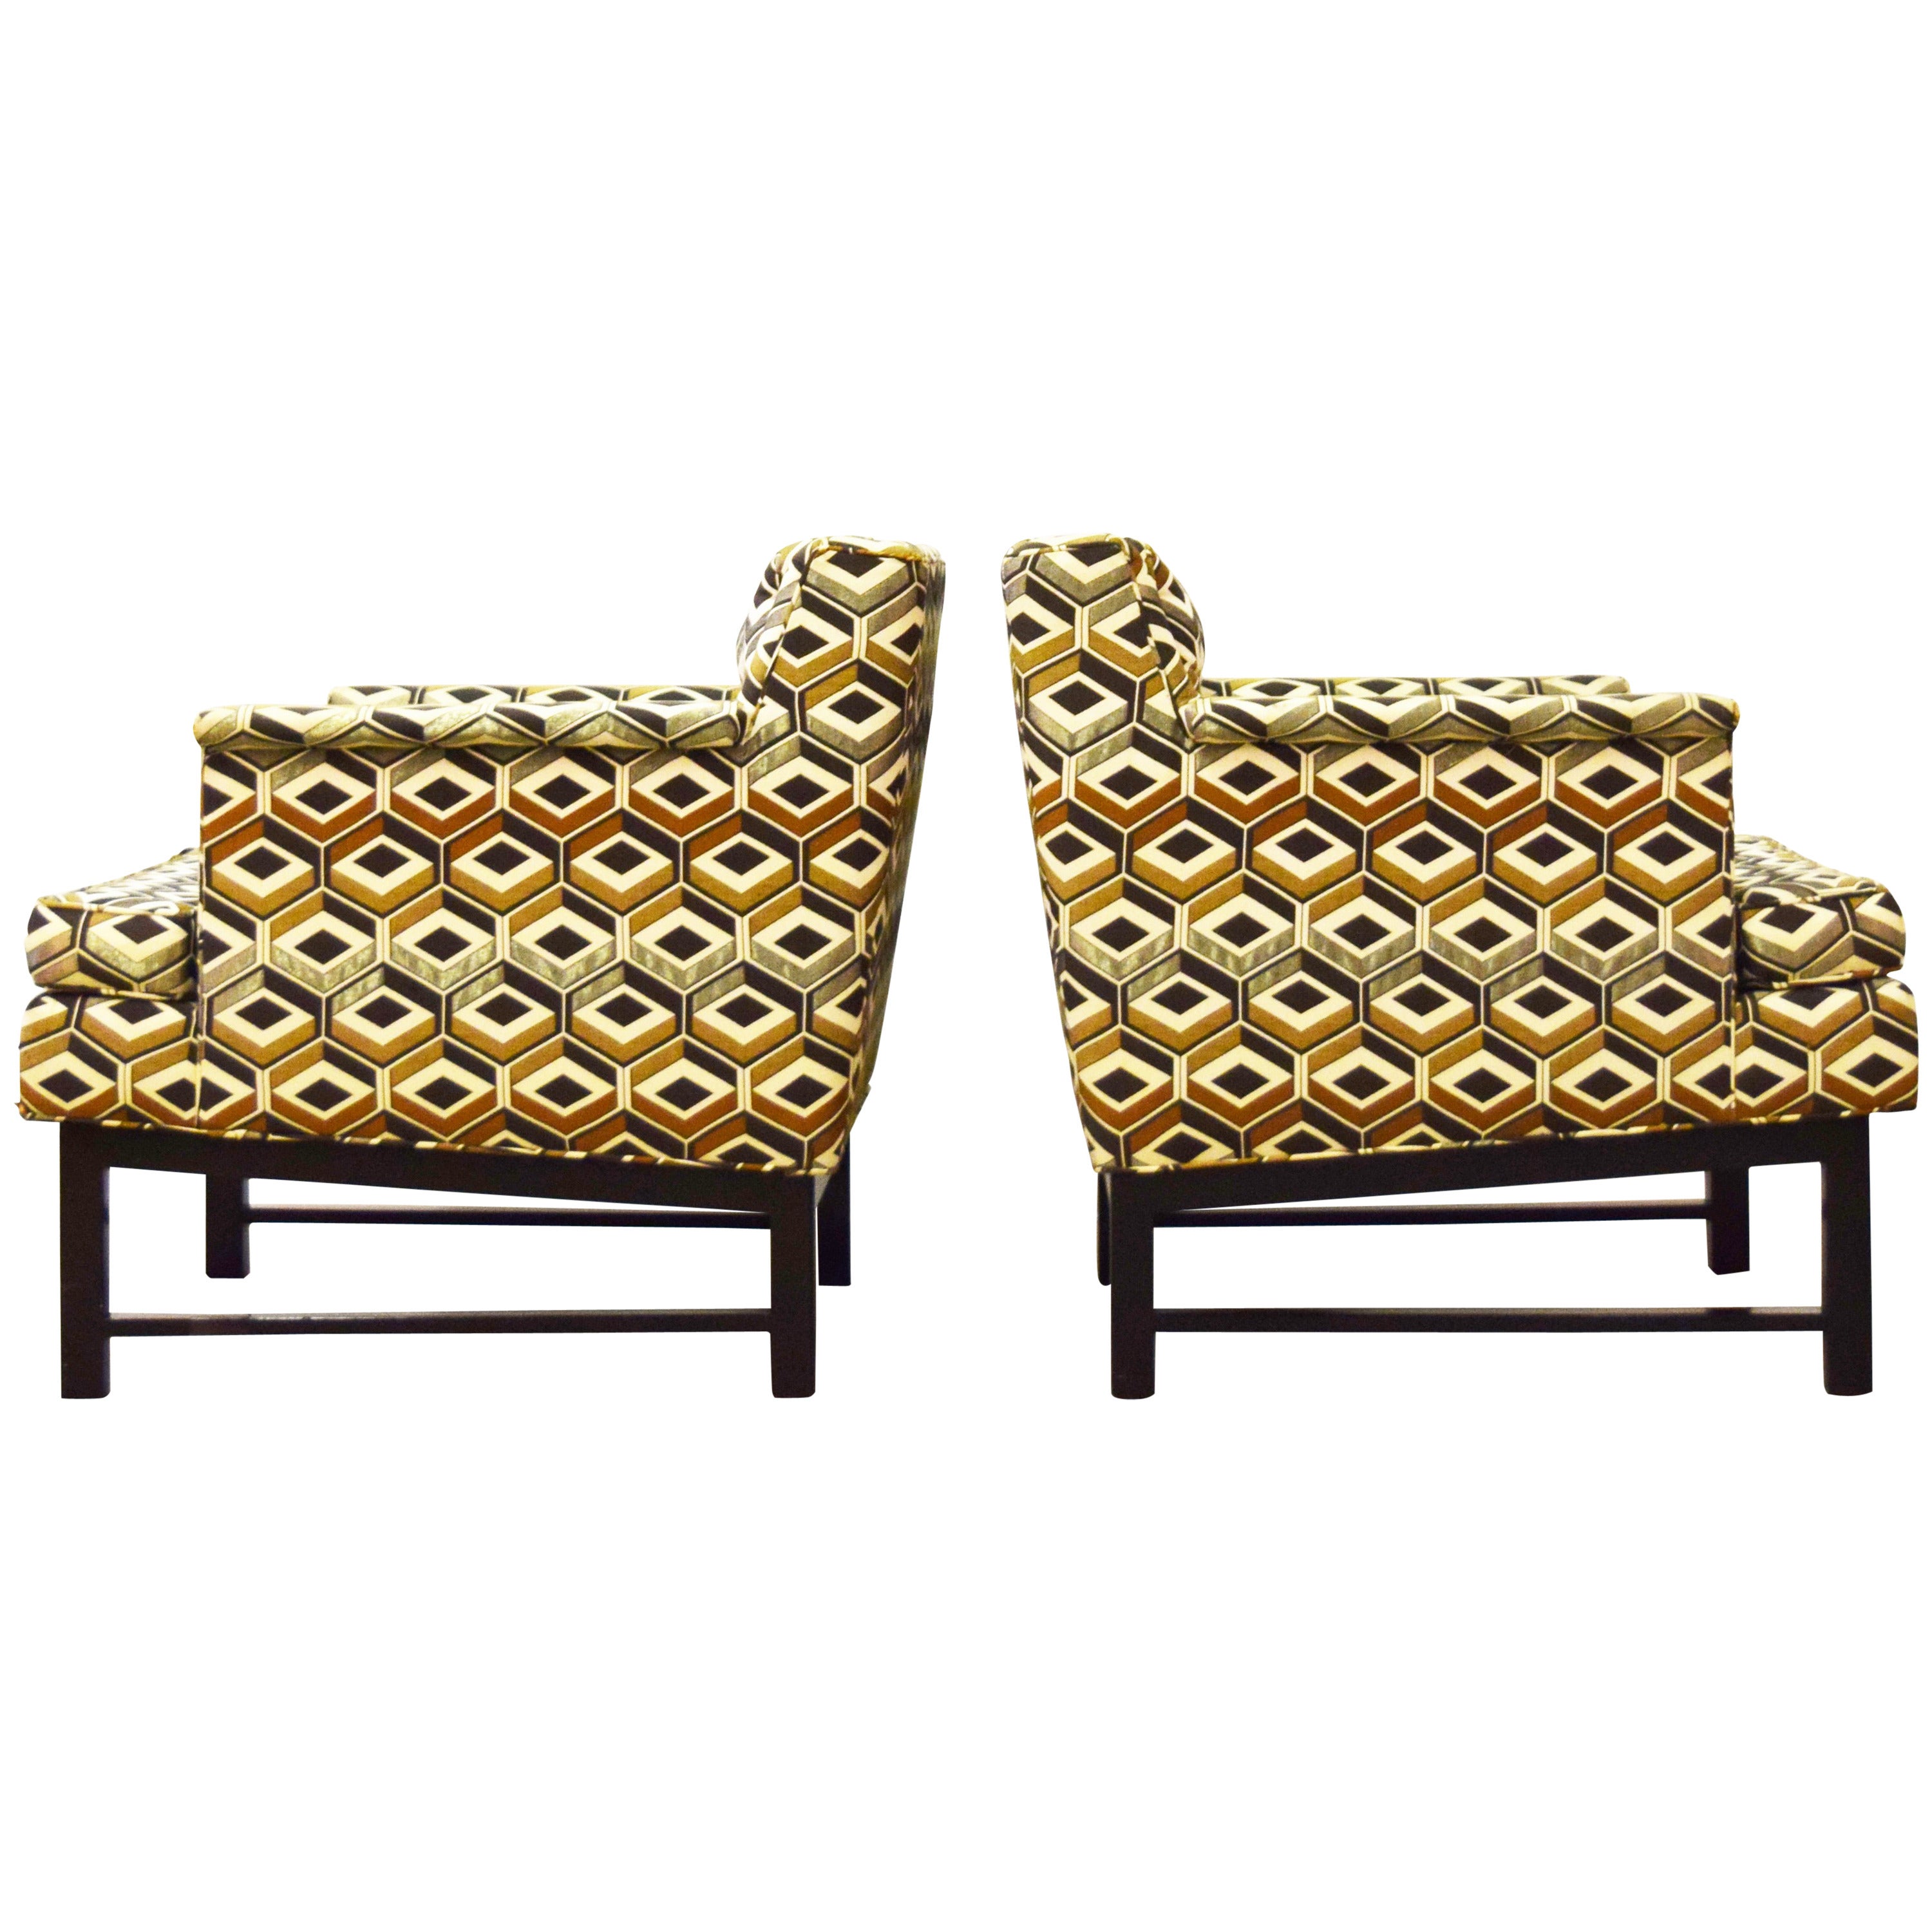 Pair of Edward Wormley for Dunbar Lounge Chairs